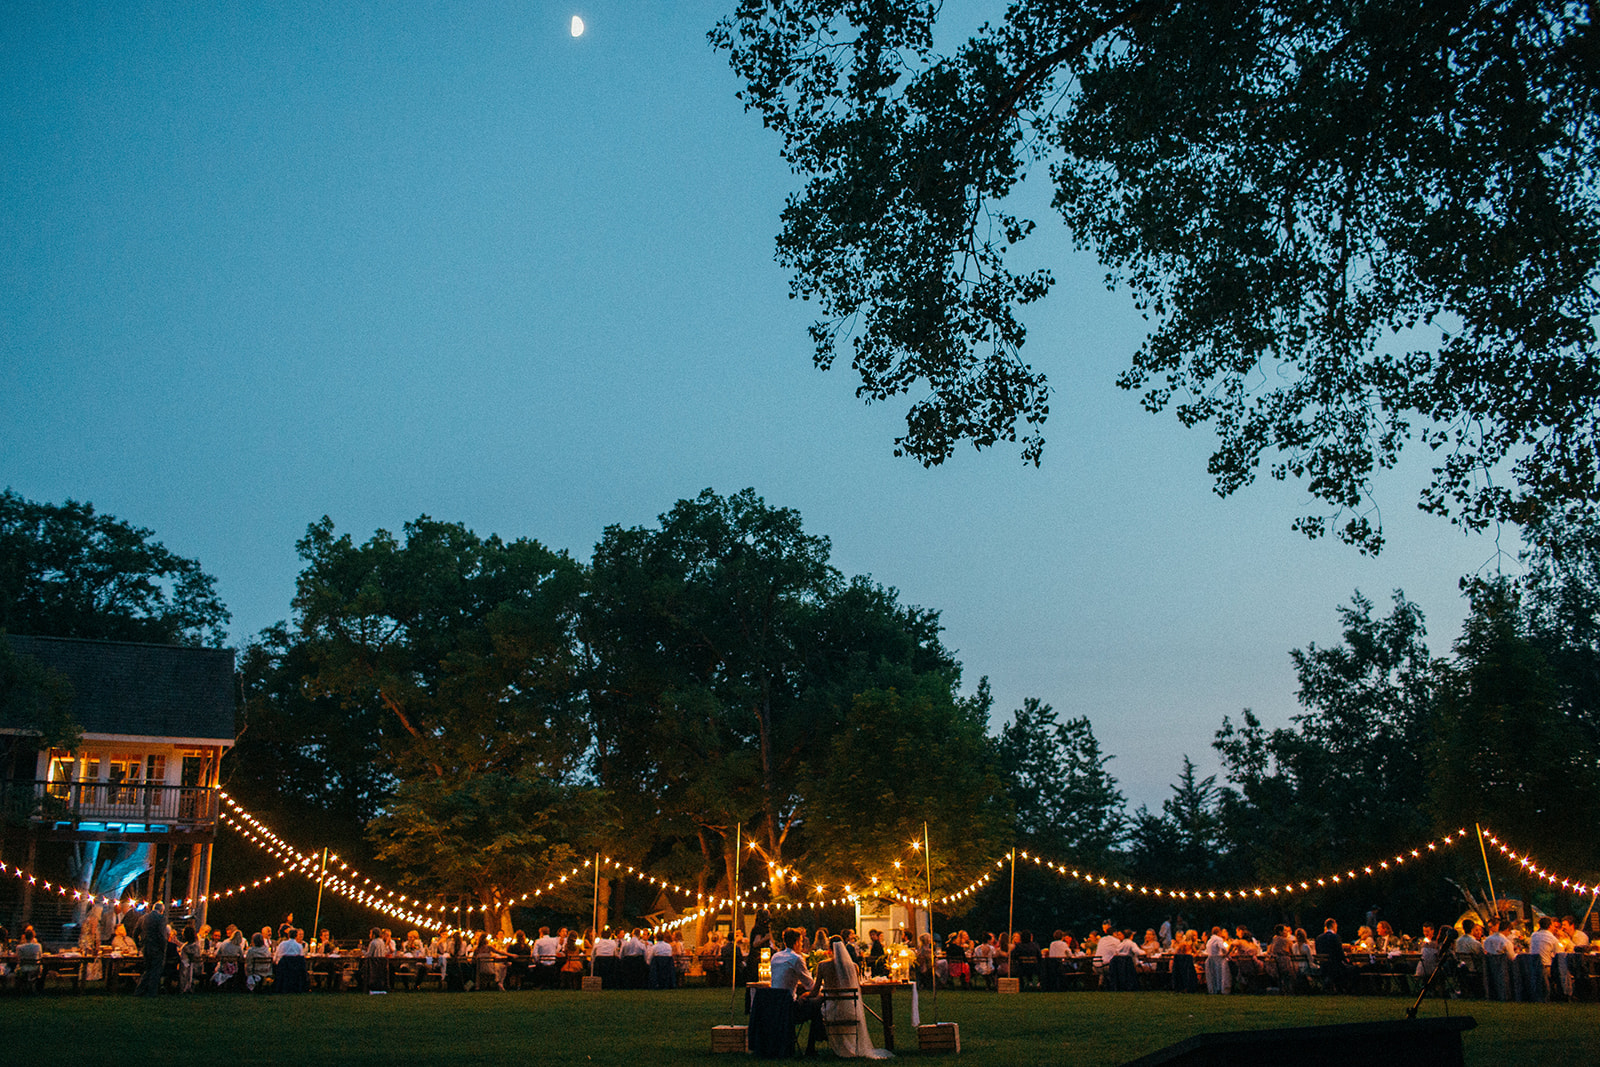 Wedding couple sits down surrounded by their guests under a moonlit sky and string lights at Camp Wandawega